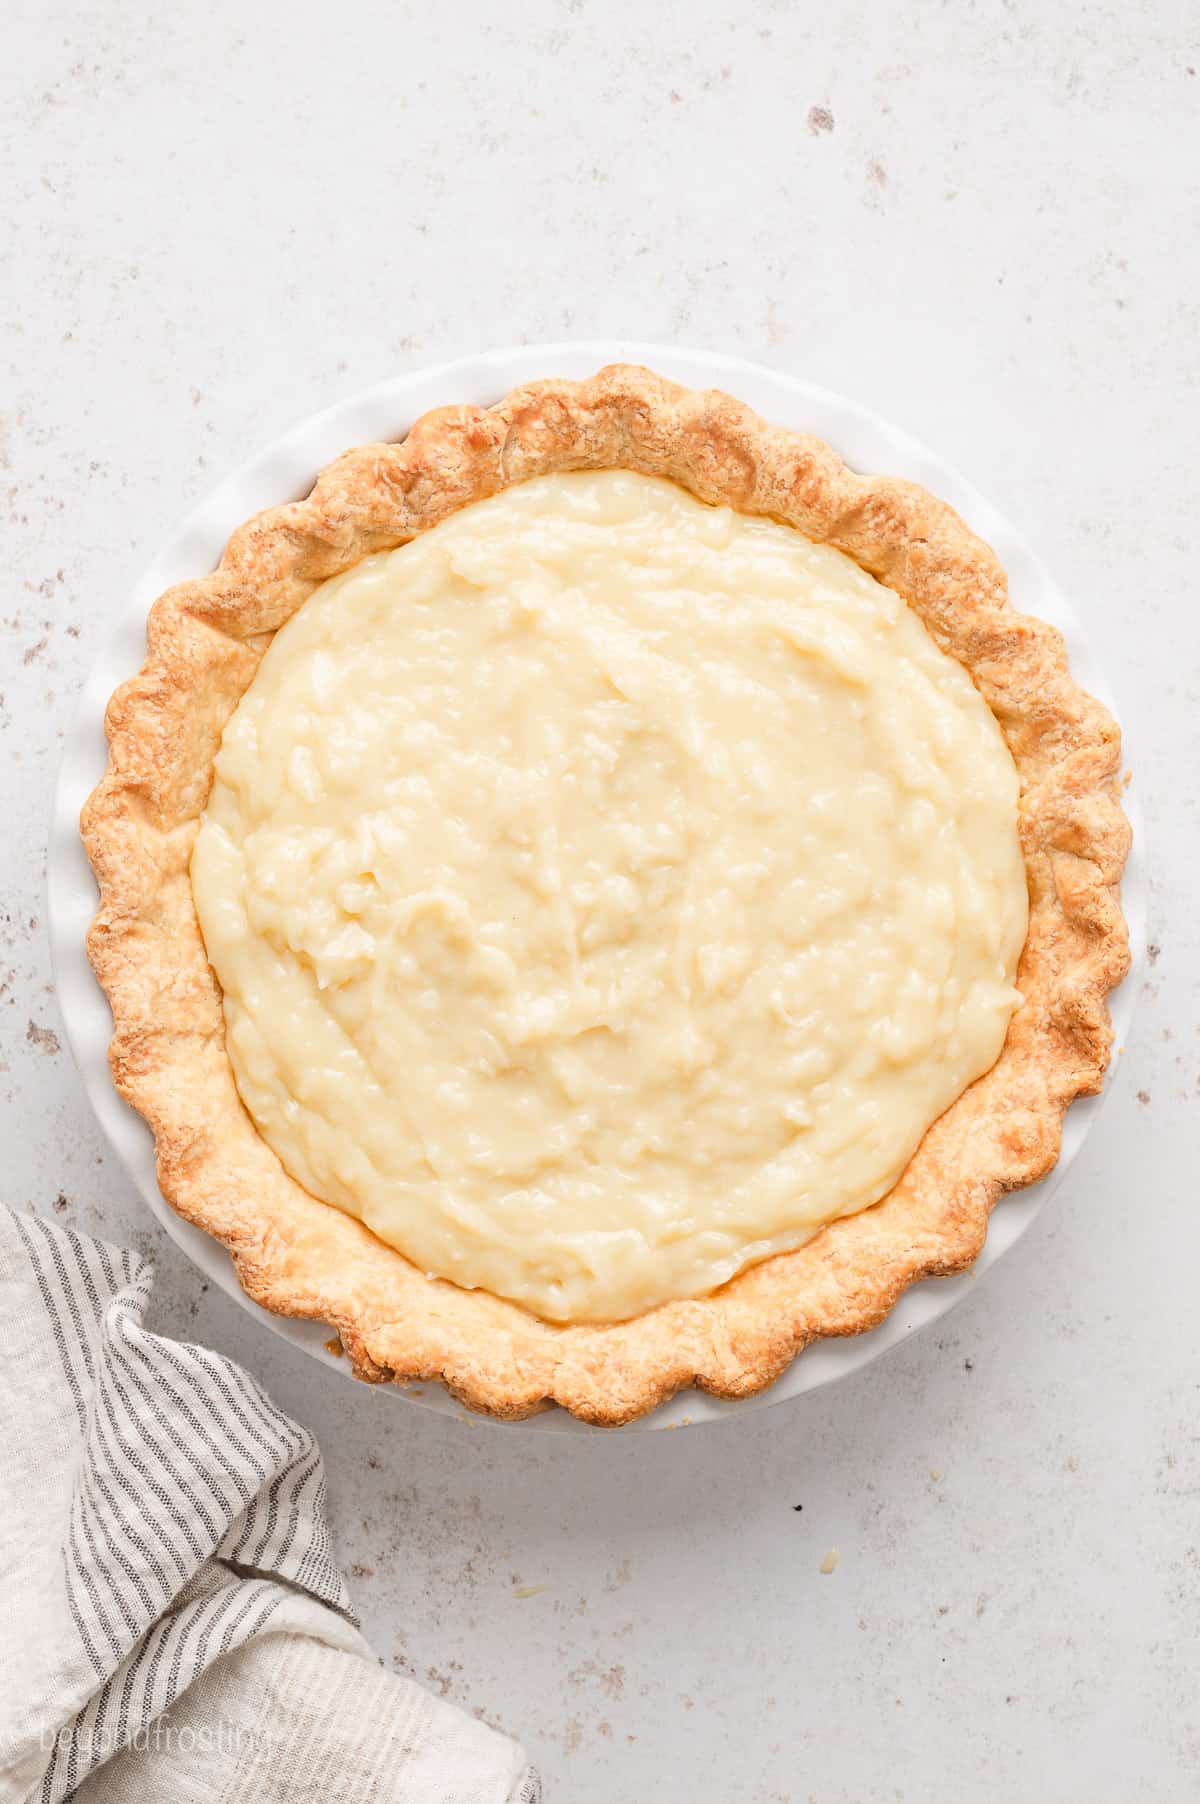 A pie crust filled with coconut cream filling.